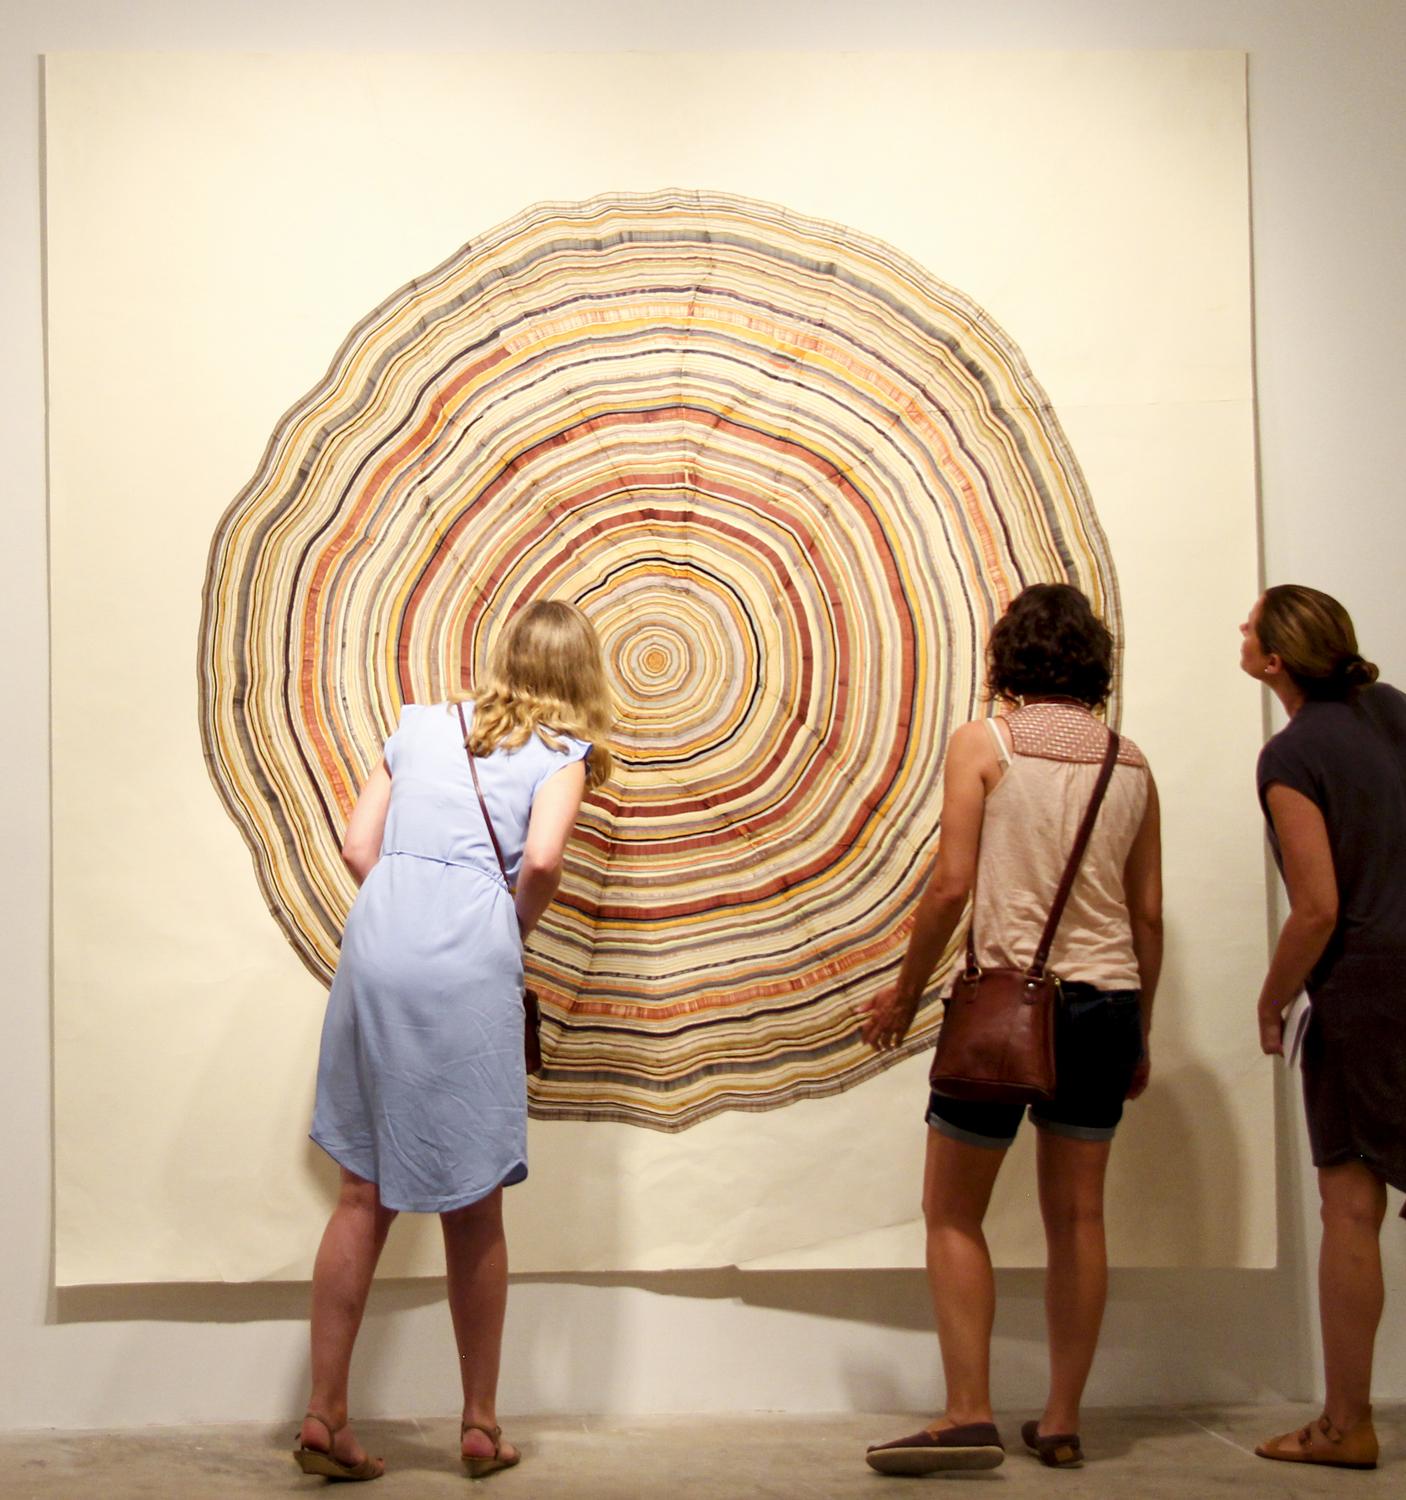 Steven L. Anderson
162 Years, 2015
marker and pen on paper
60 x 60 inches

The Tree Rings artworks are made on paper which is torn and reassembled, scratched, and sanded. From there, they are built in perhaps the same way that trees grow: starting